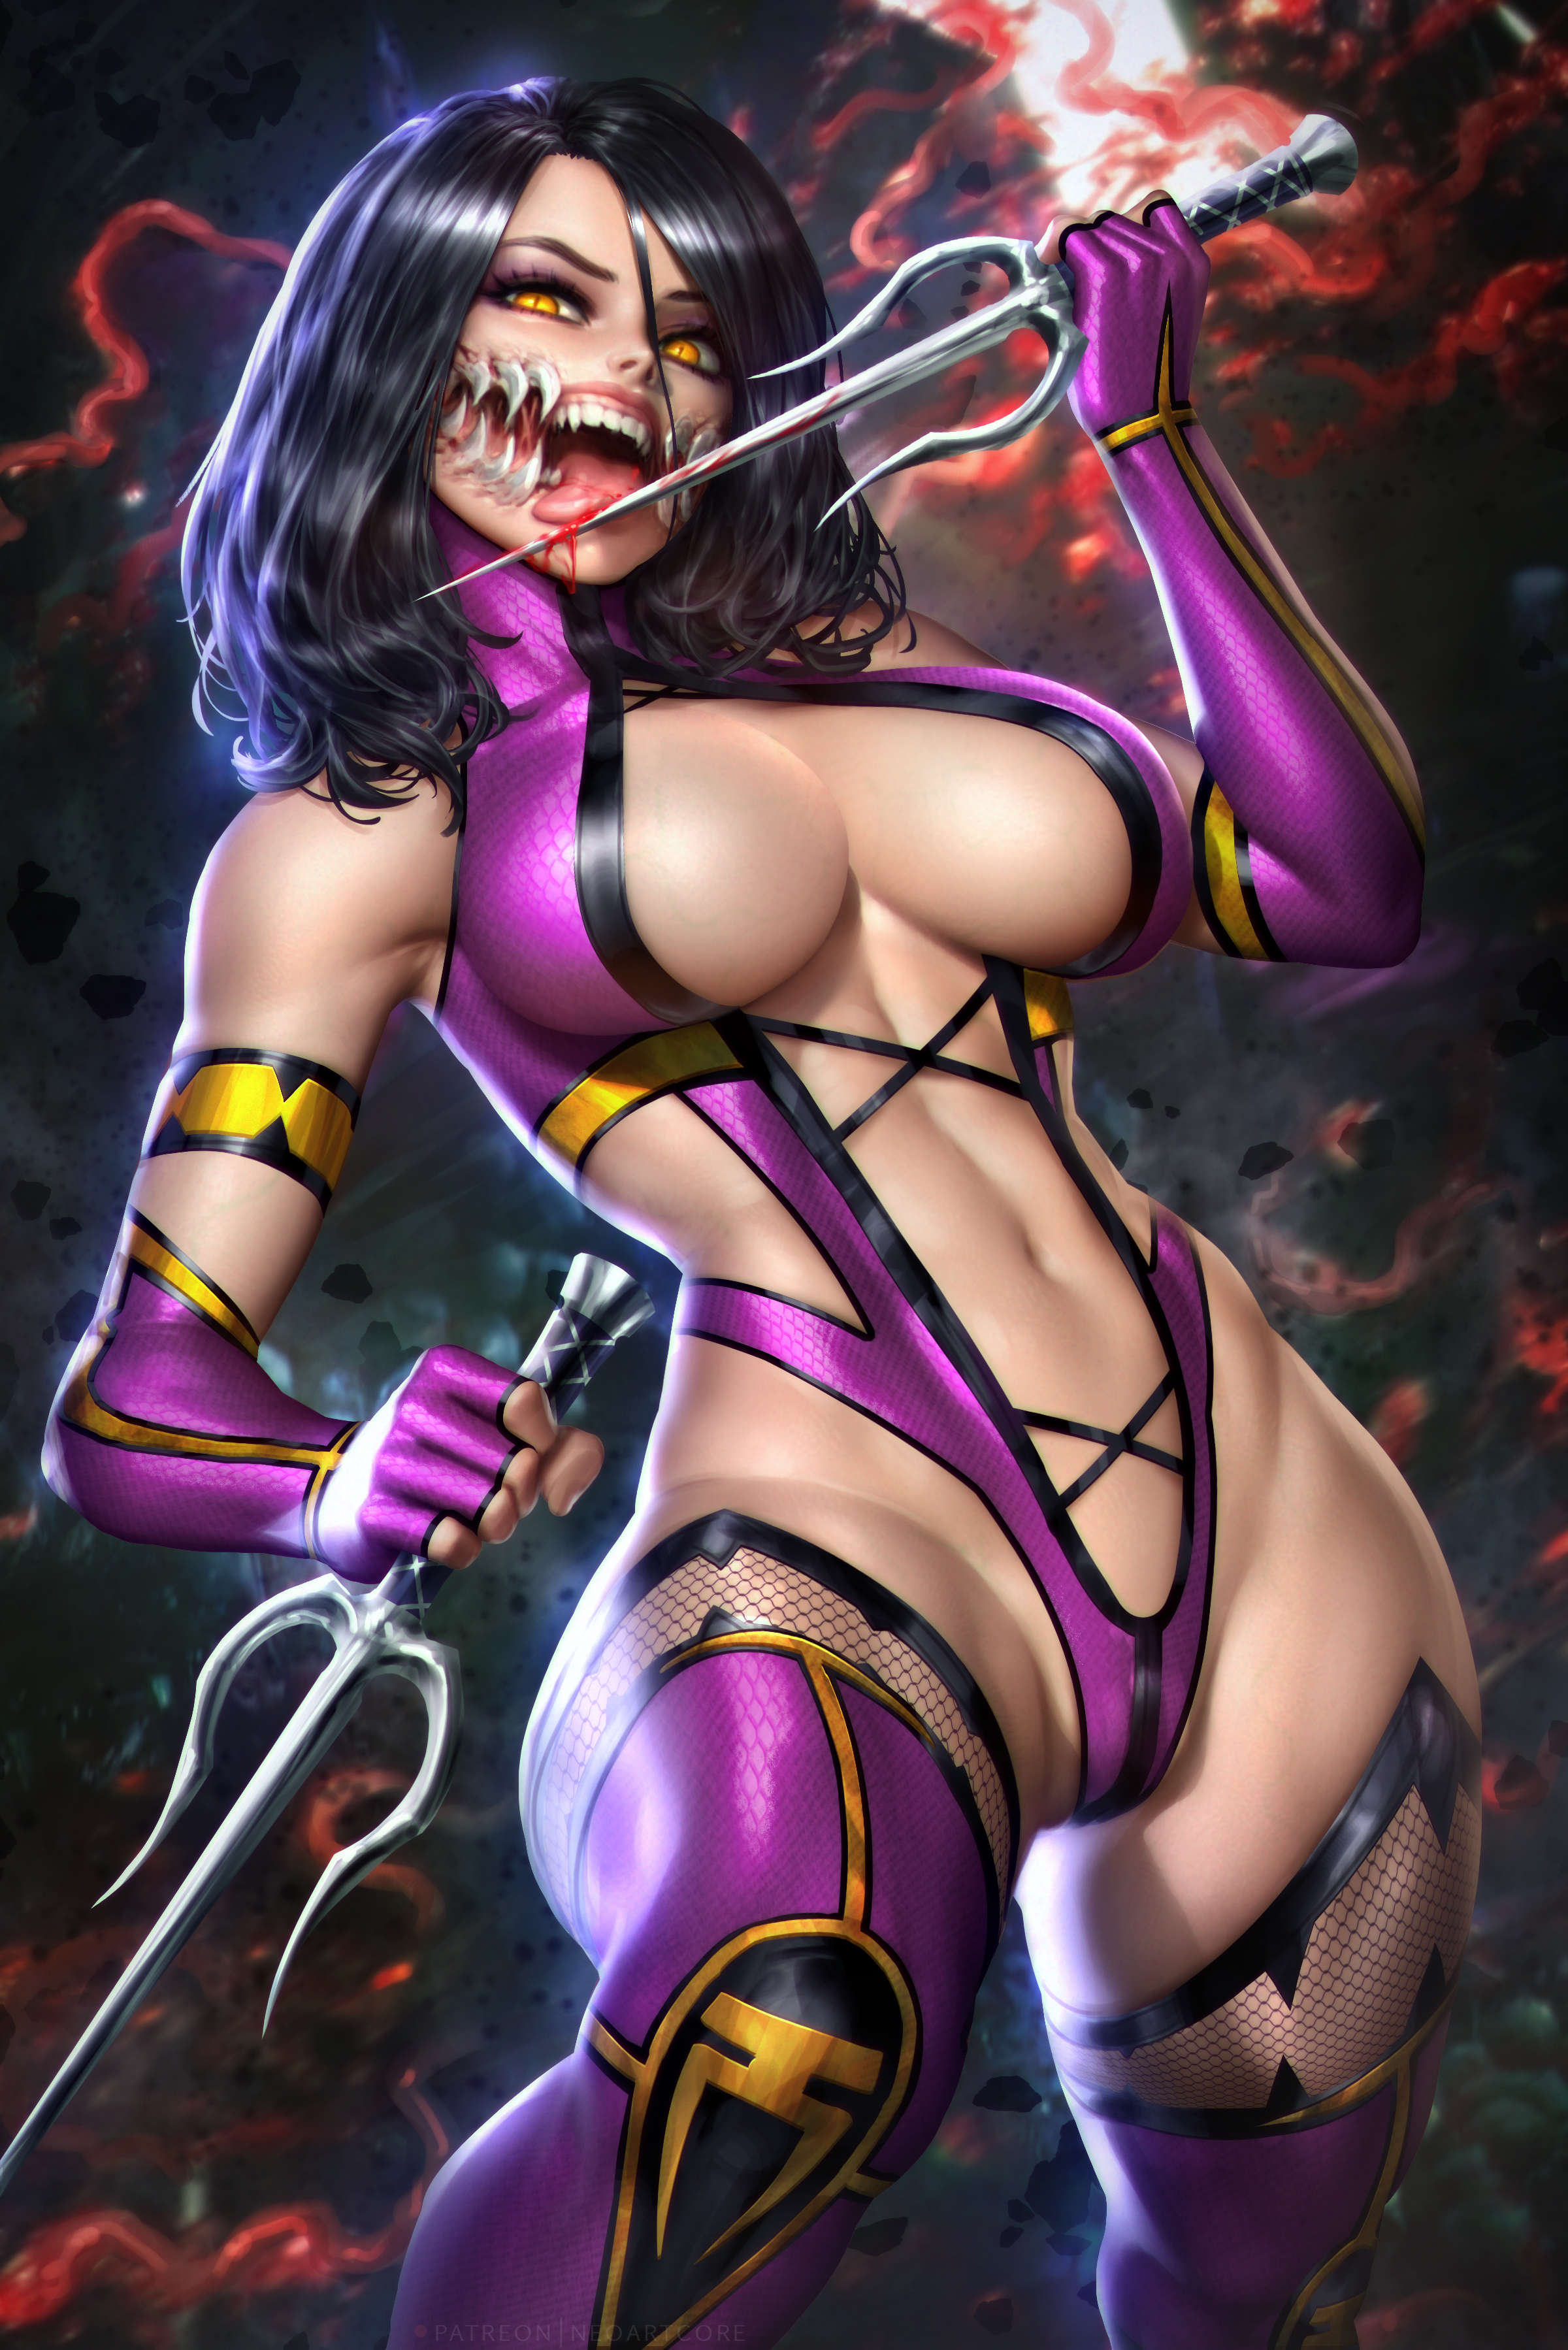 General 2400x3597 Mileena (Mortal Kombat) Mortal Kombat video games video game girls fictional character fantasy girl women video game characters arm warmers weapon blood licking tongue out bodysuit cleavage belly thick thigh fishnet stockings fantasy art artwork 2D illustration fan art digital art NeoArtCorE (artist) video game warriors curvy boobs big boobs fangs dagger black hair